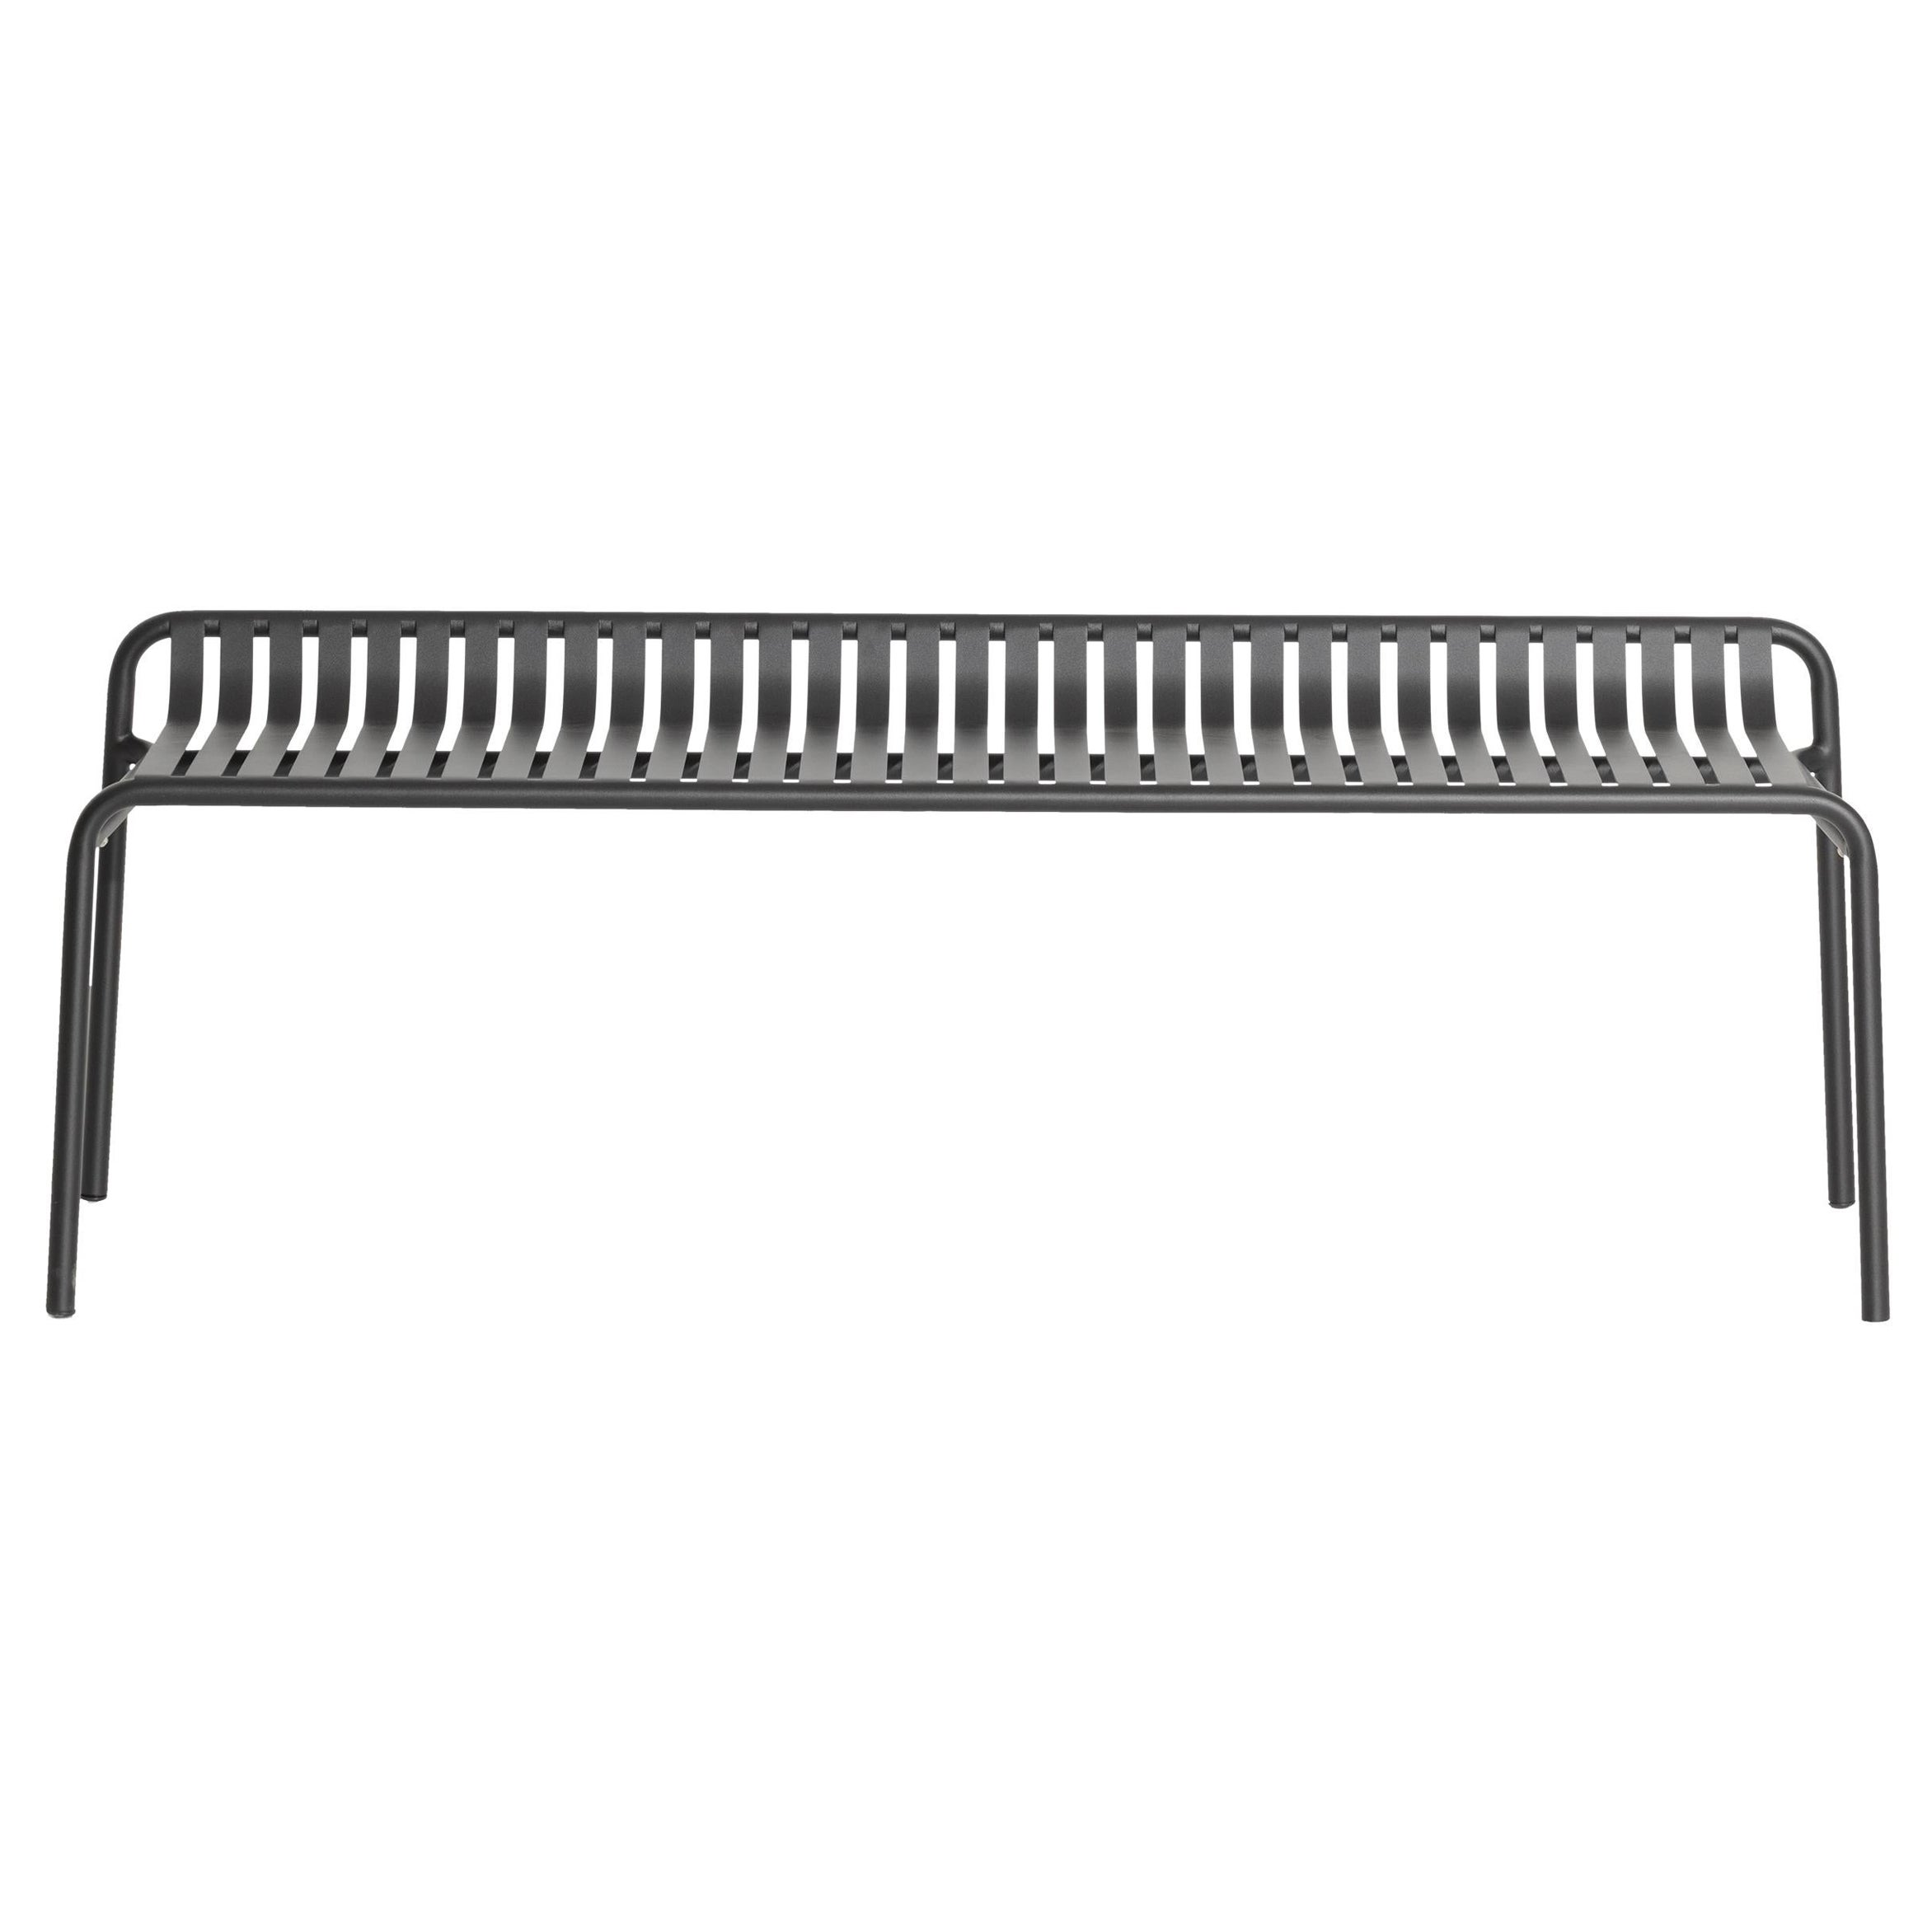 Petite Friture Week-End Bench without Back in Black Aluminium, 2017  For Sale